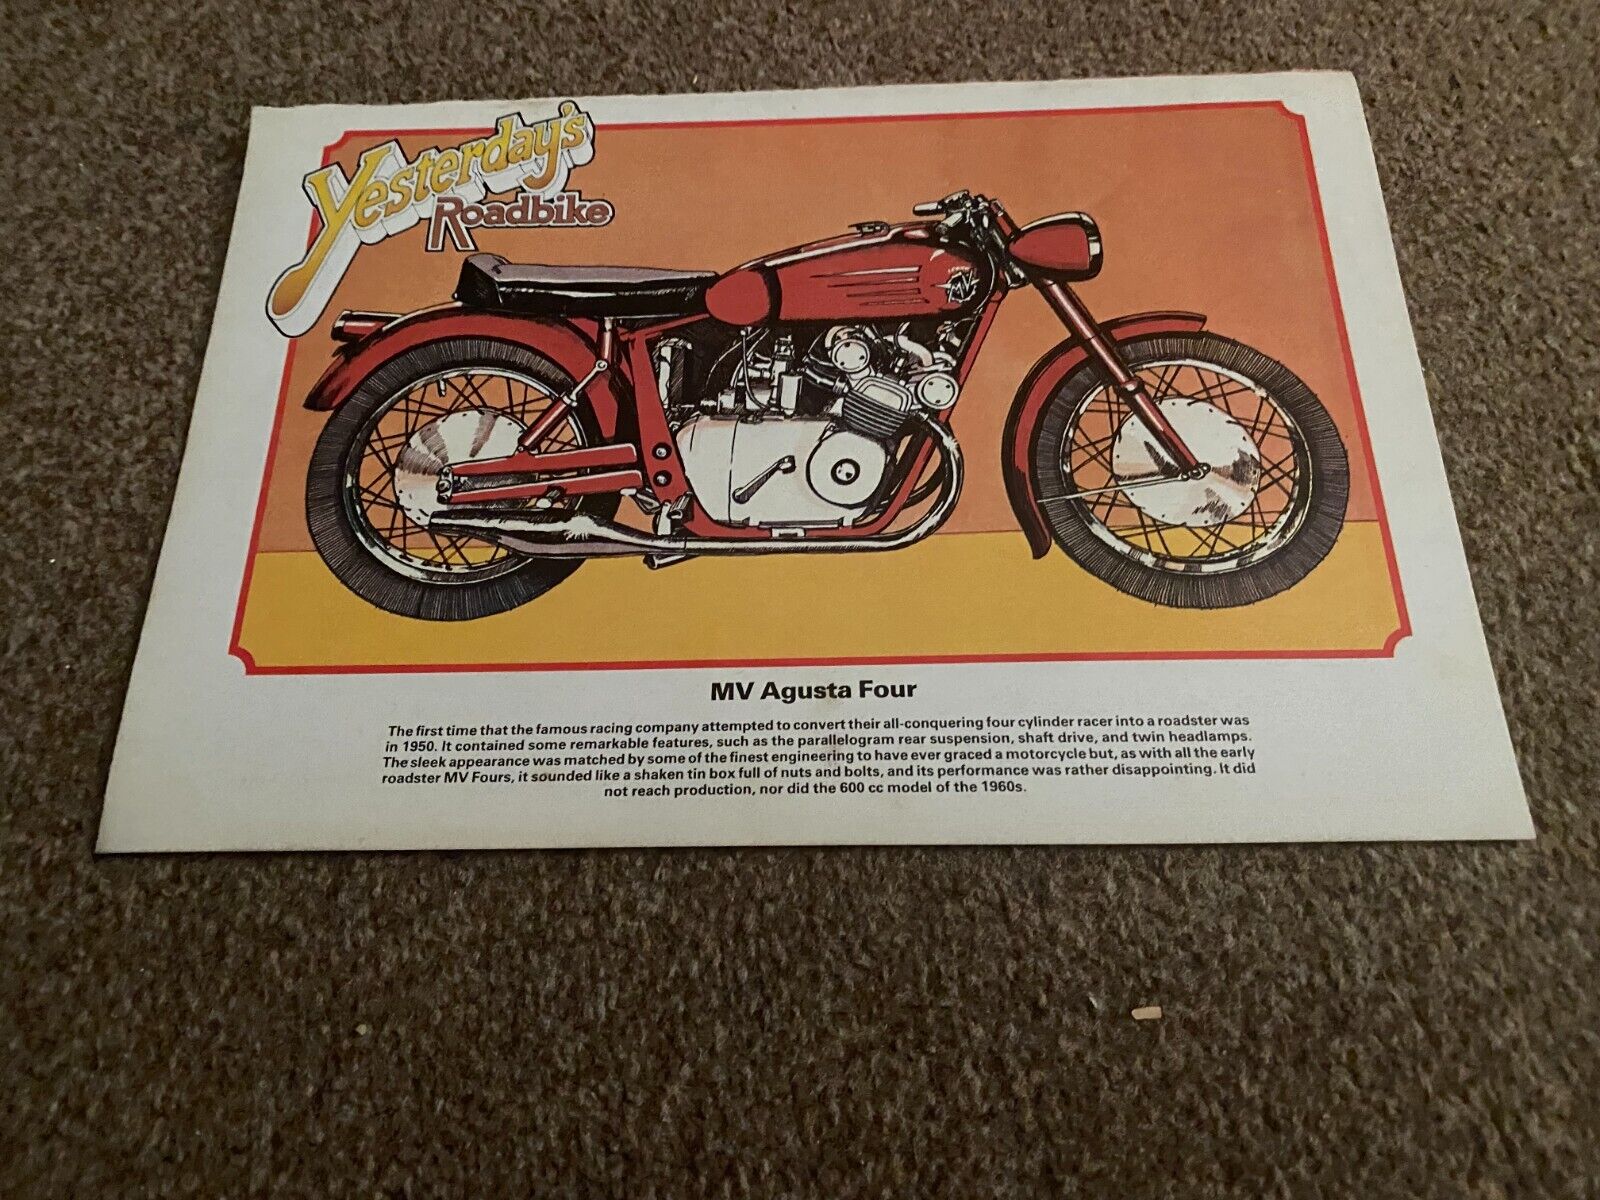 VBK41 YESTERDAY\'S ROADBIKE PICTURE PIN UP 11X8 MV AUGUSTA FOUR MOTORCYCLE